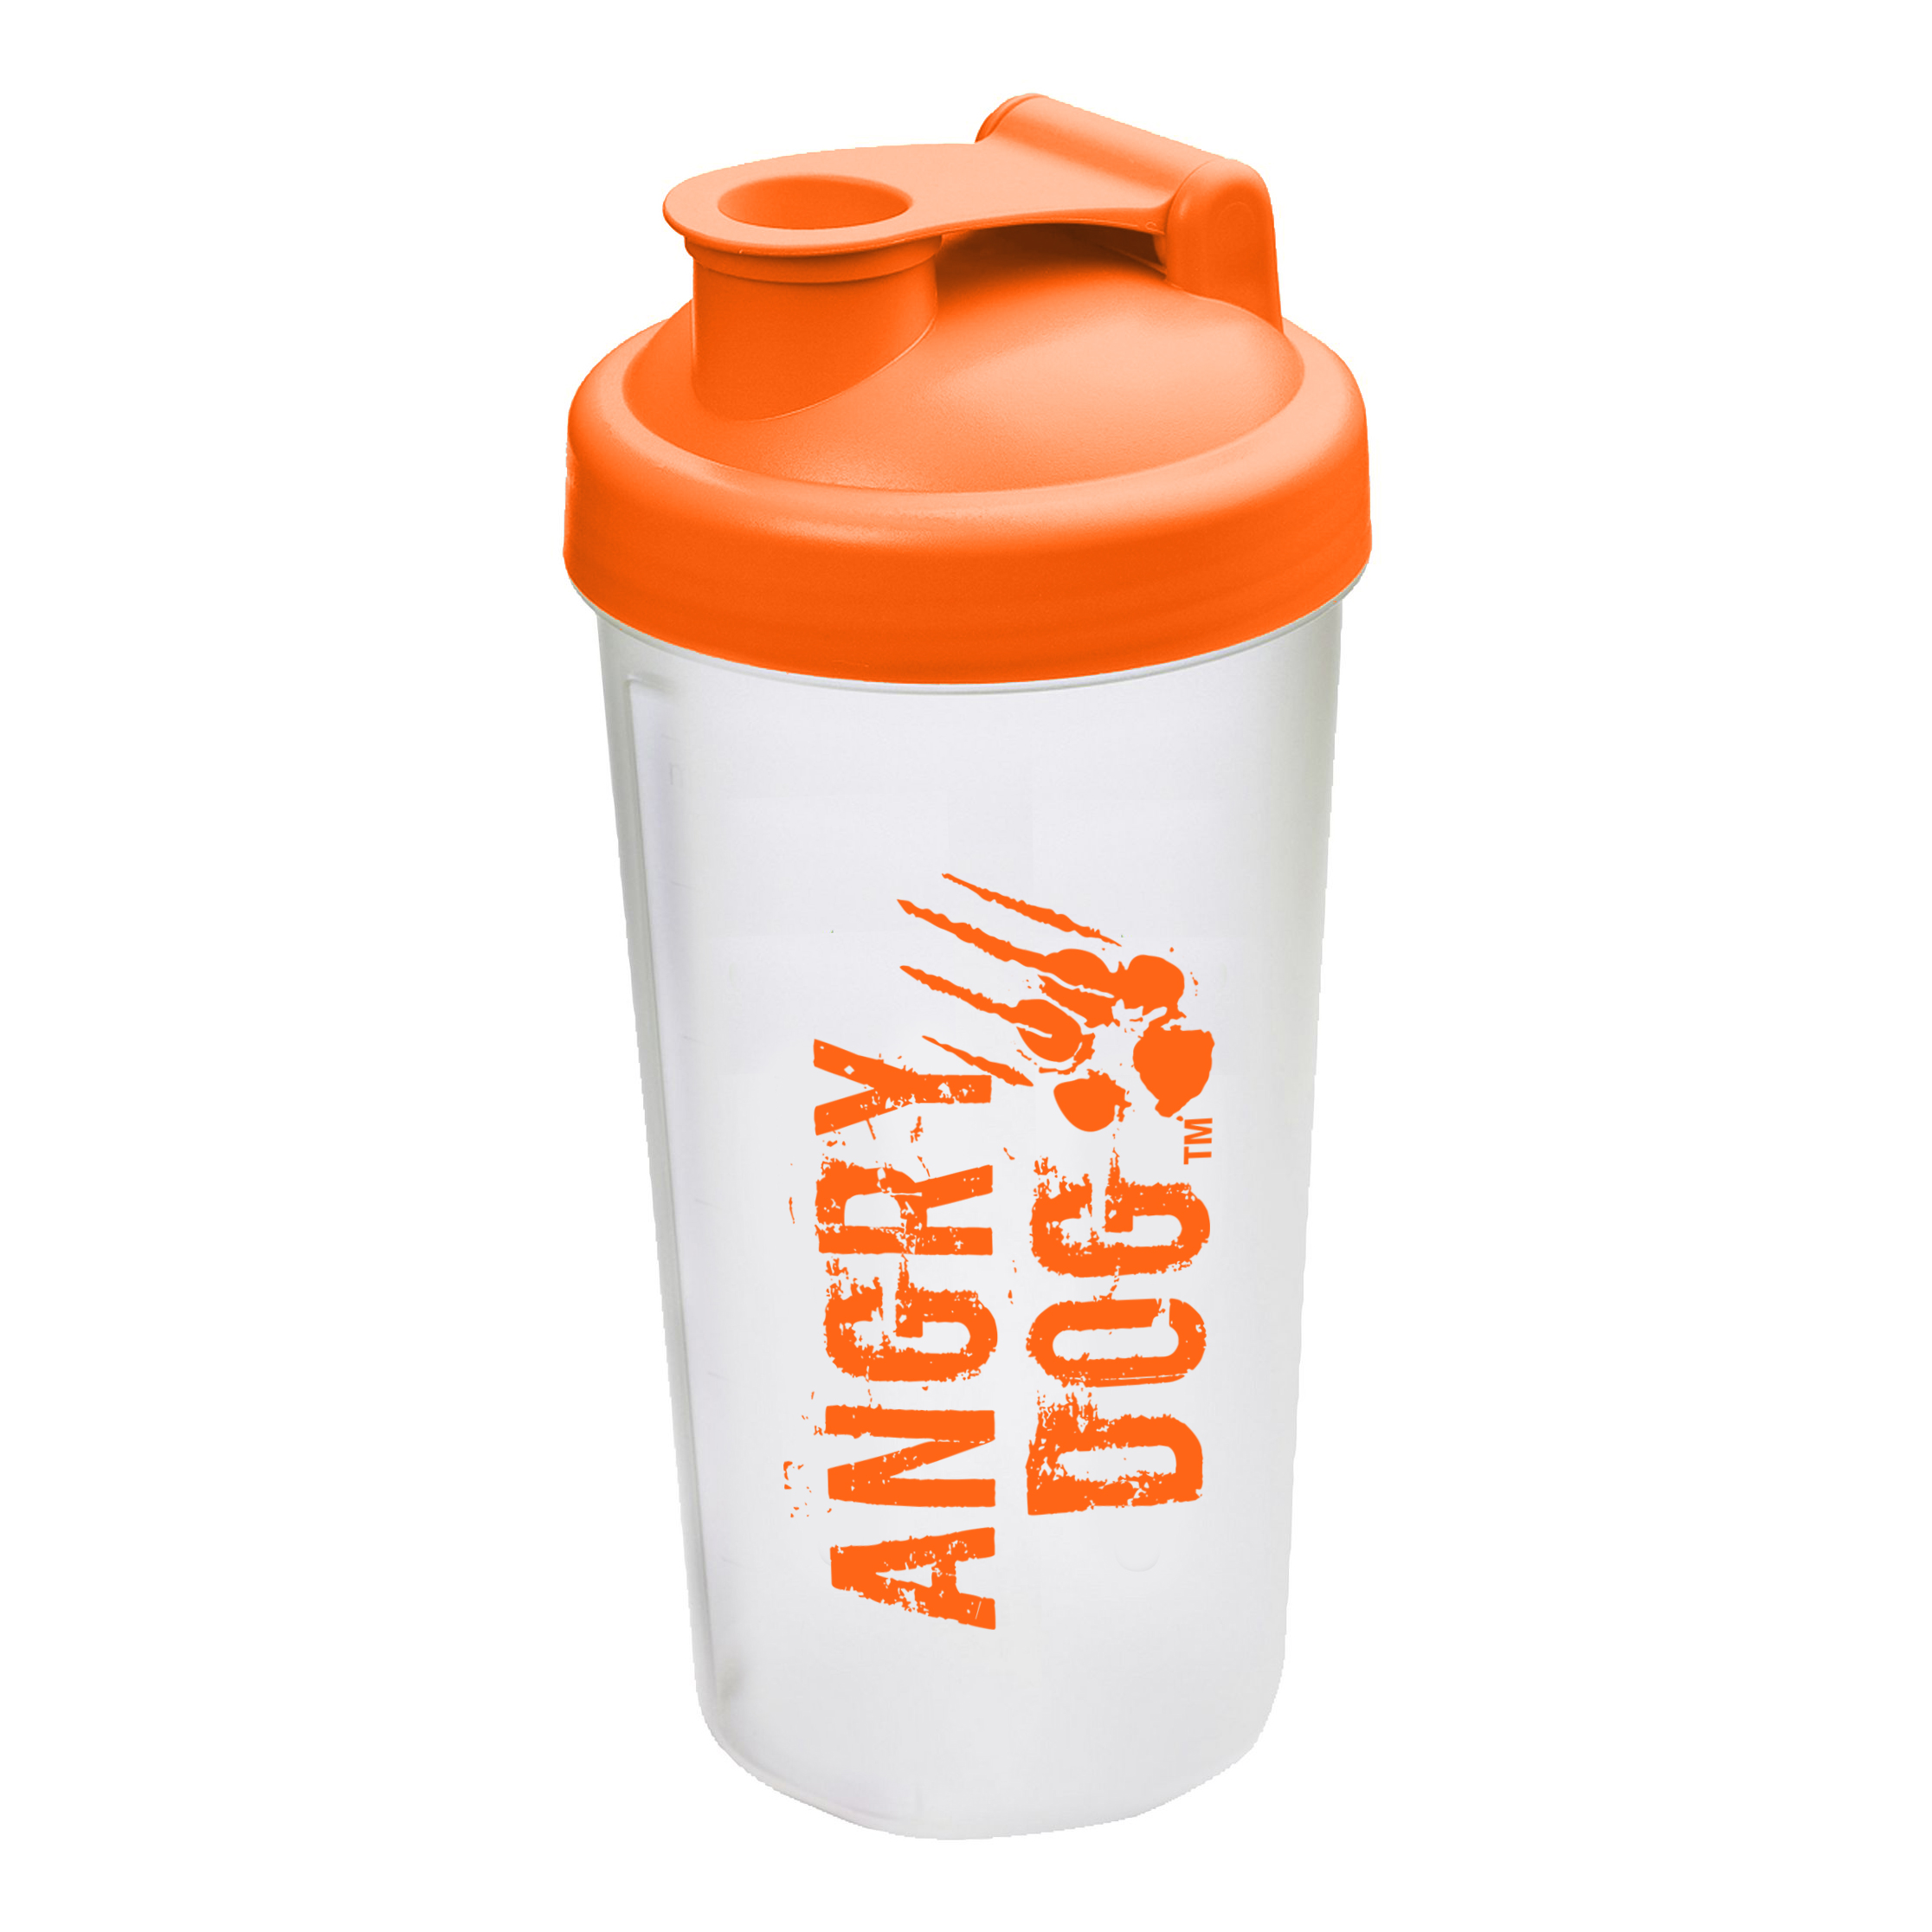 Angry-Dog-Protein-Shaker